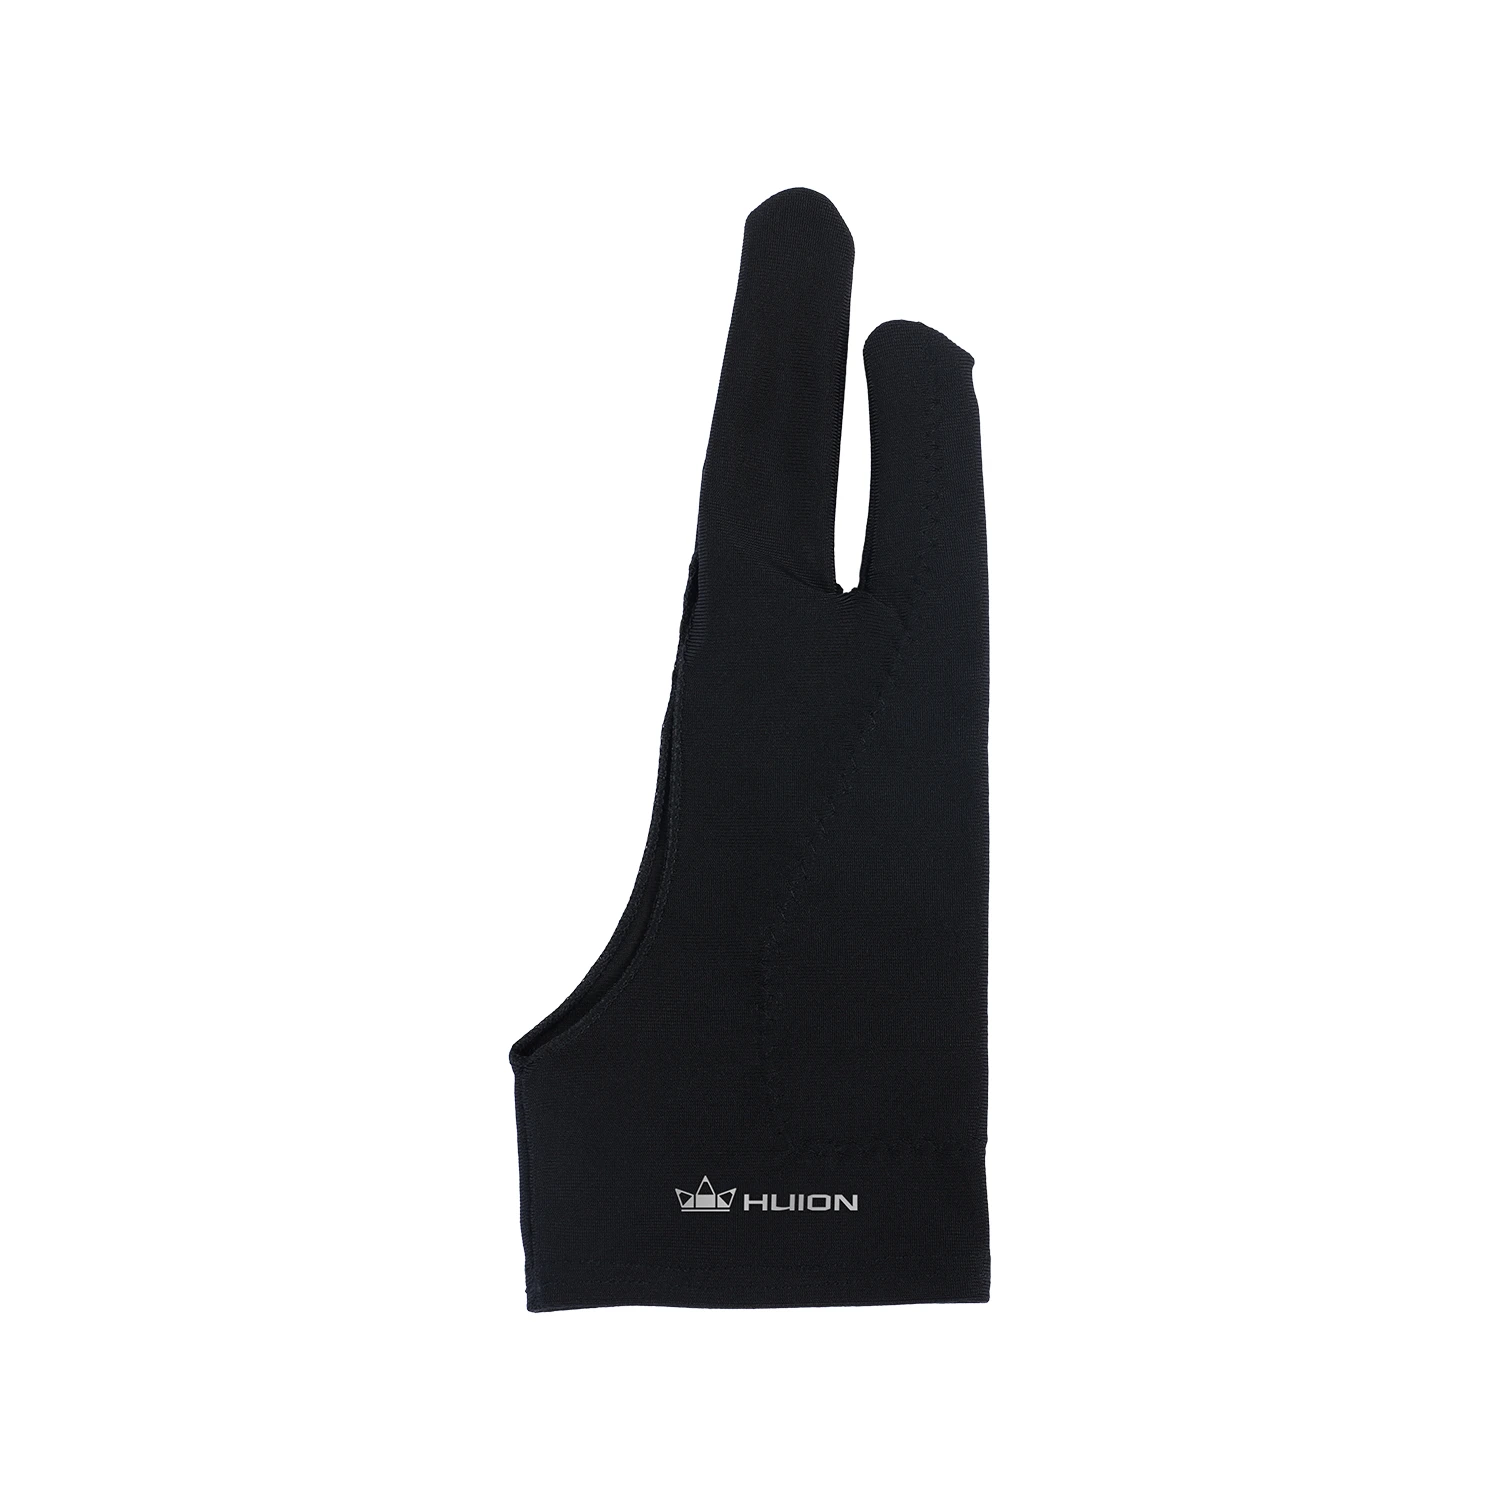 Huion Palm Rejection Artist Glove  Huion Official Store: Drawing